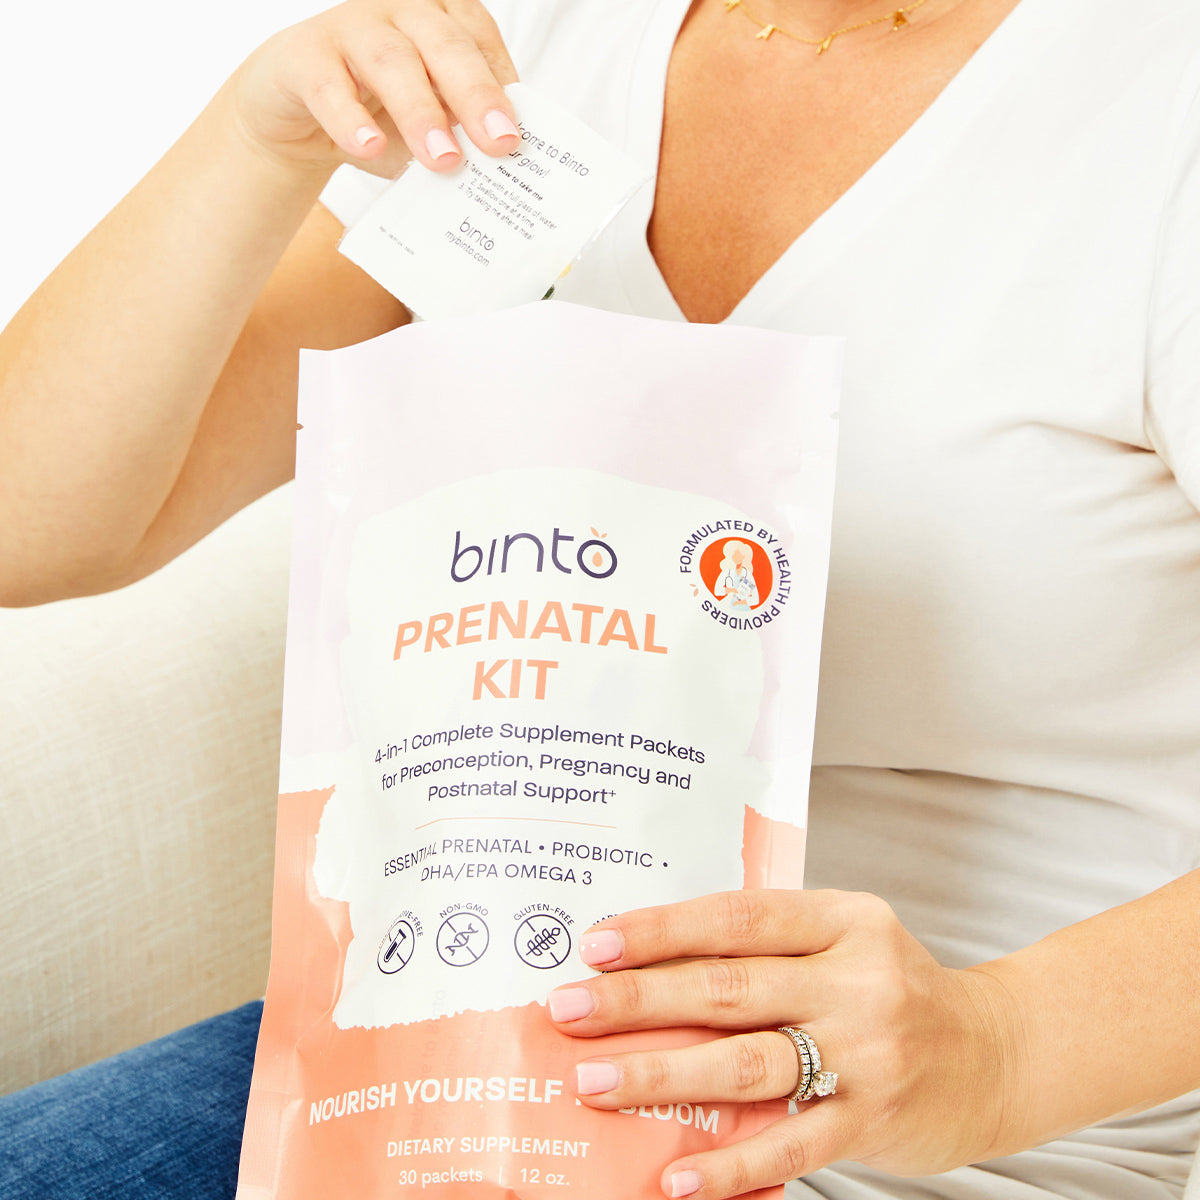 Woman holding Binto Prenatal Kit and supplement pack